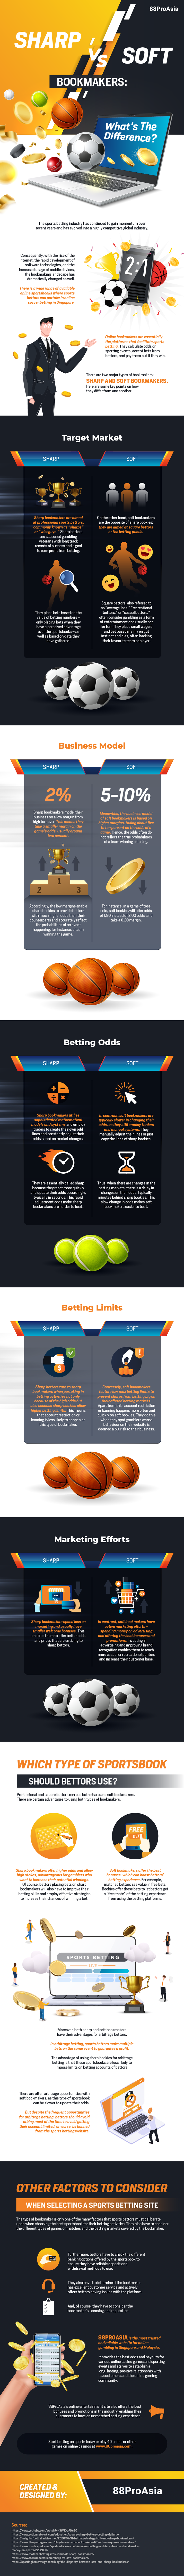 sharp-vs-soft-bookmakers-whats-the-difference-online-soccer-football-betting-singapore-malaysia-infographic